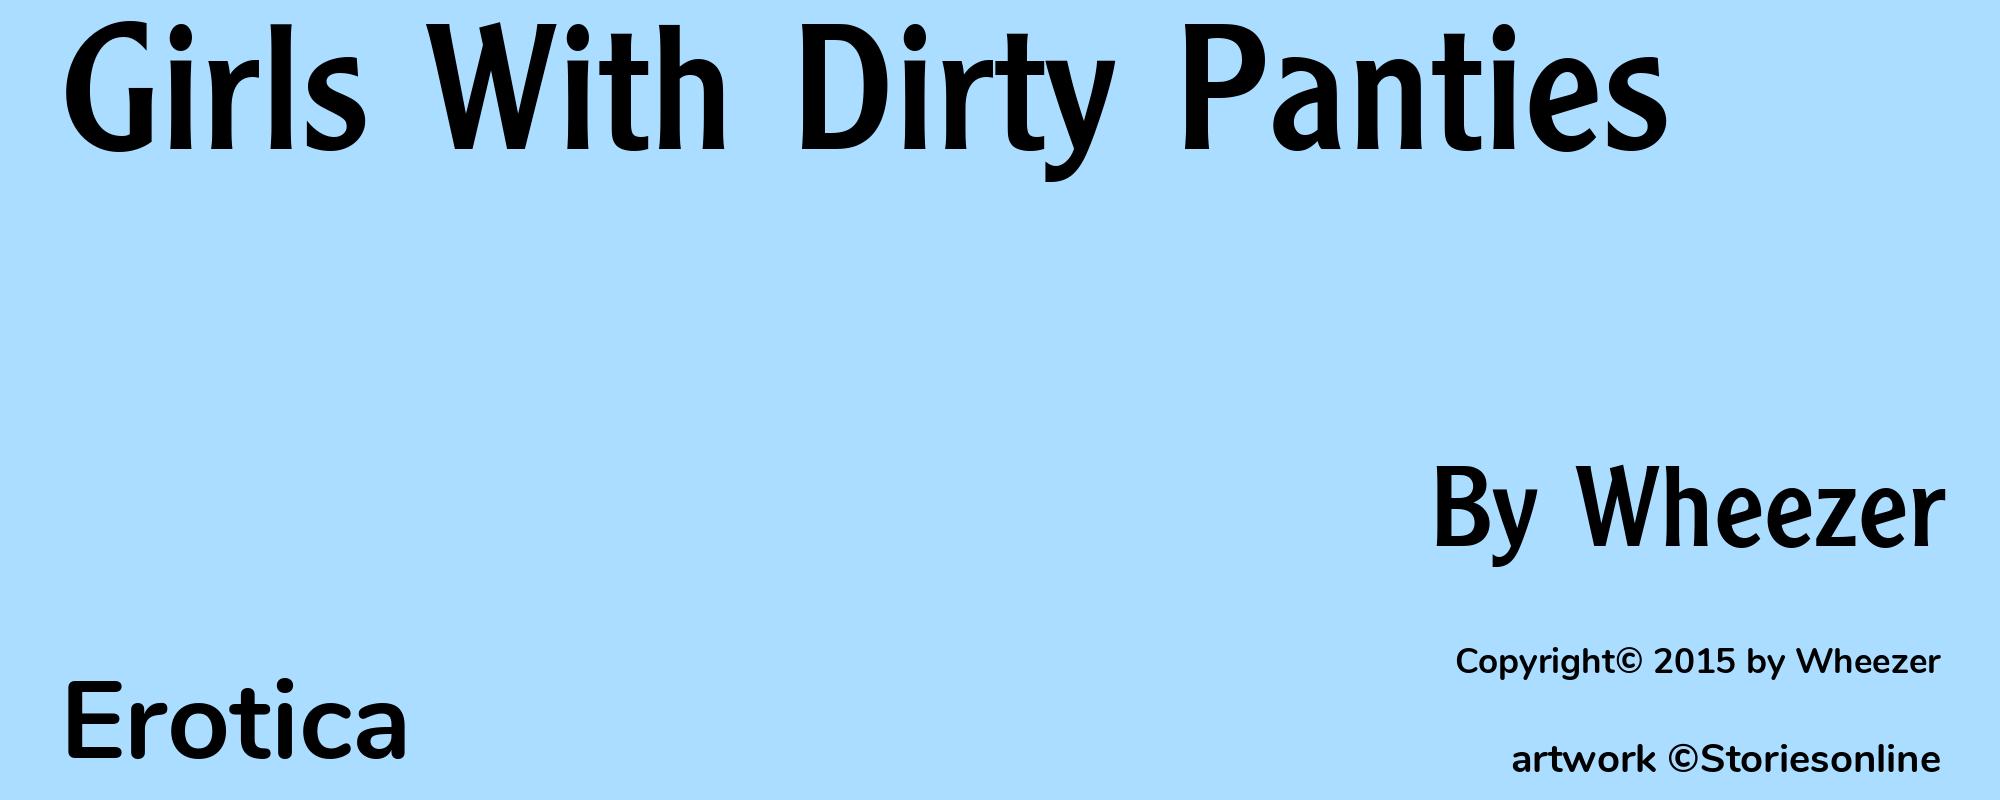 Girls With Dirty Panties - Cover